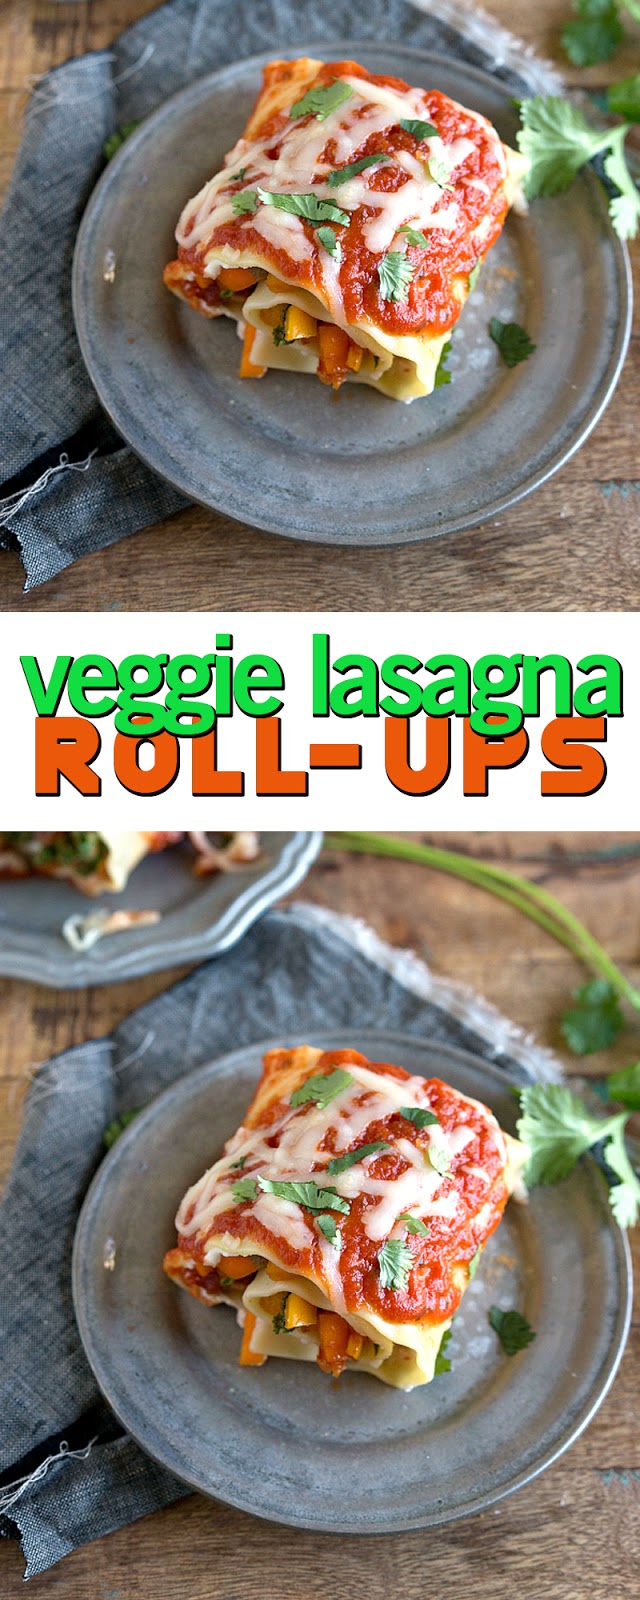 EASY VEGETABLE AND KALE LASAGNA ROLL-UPS